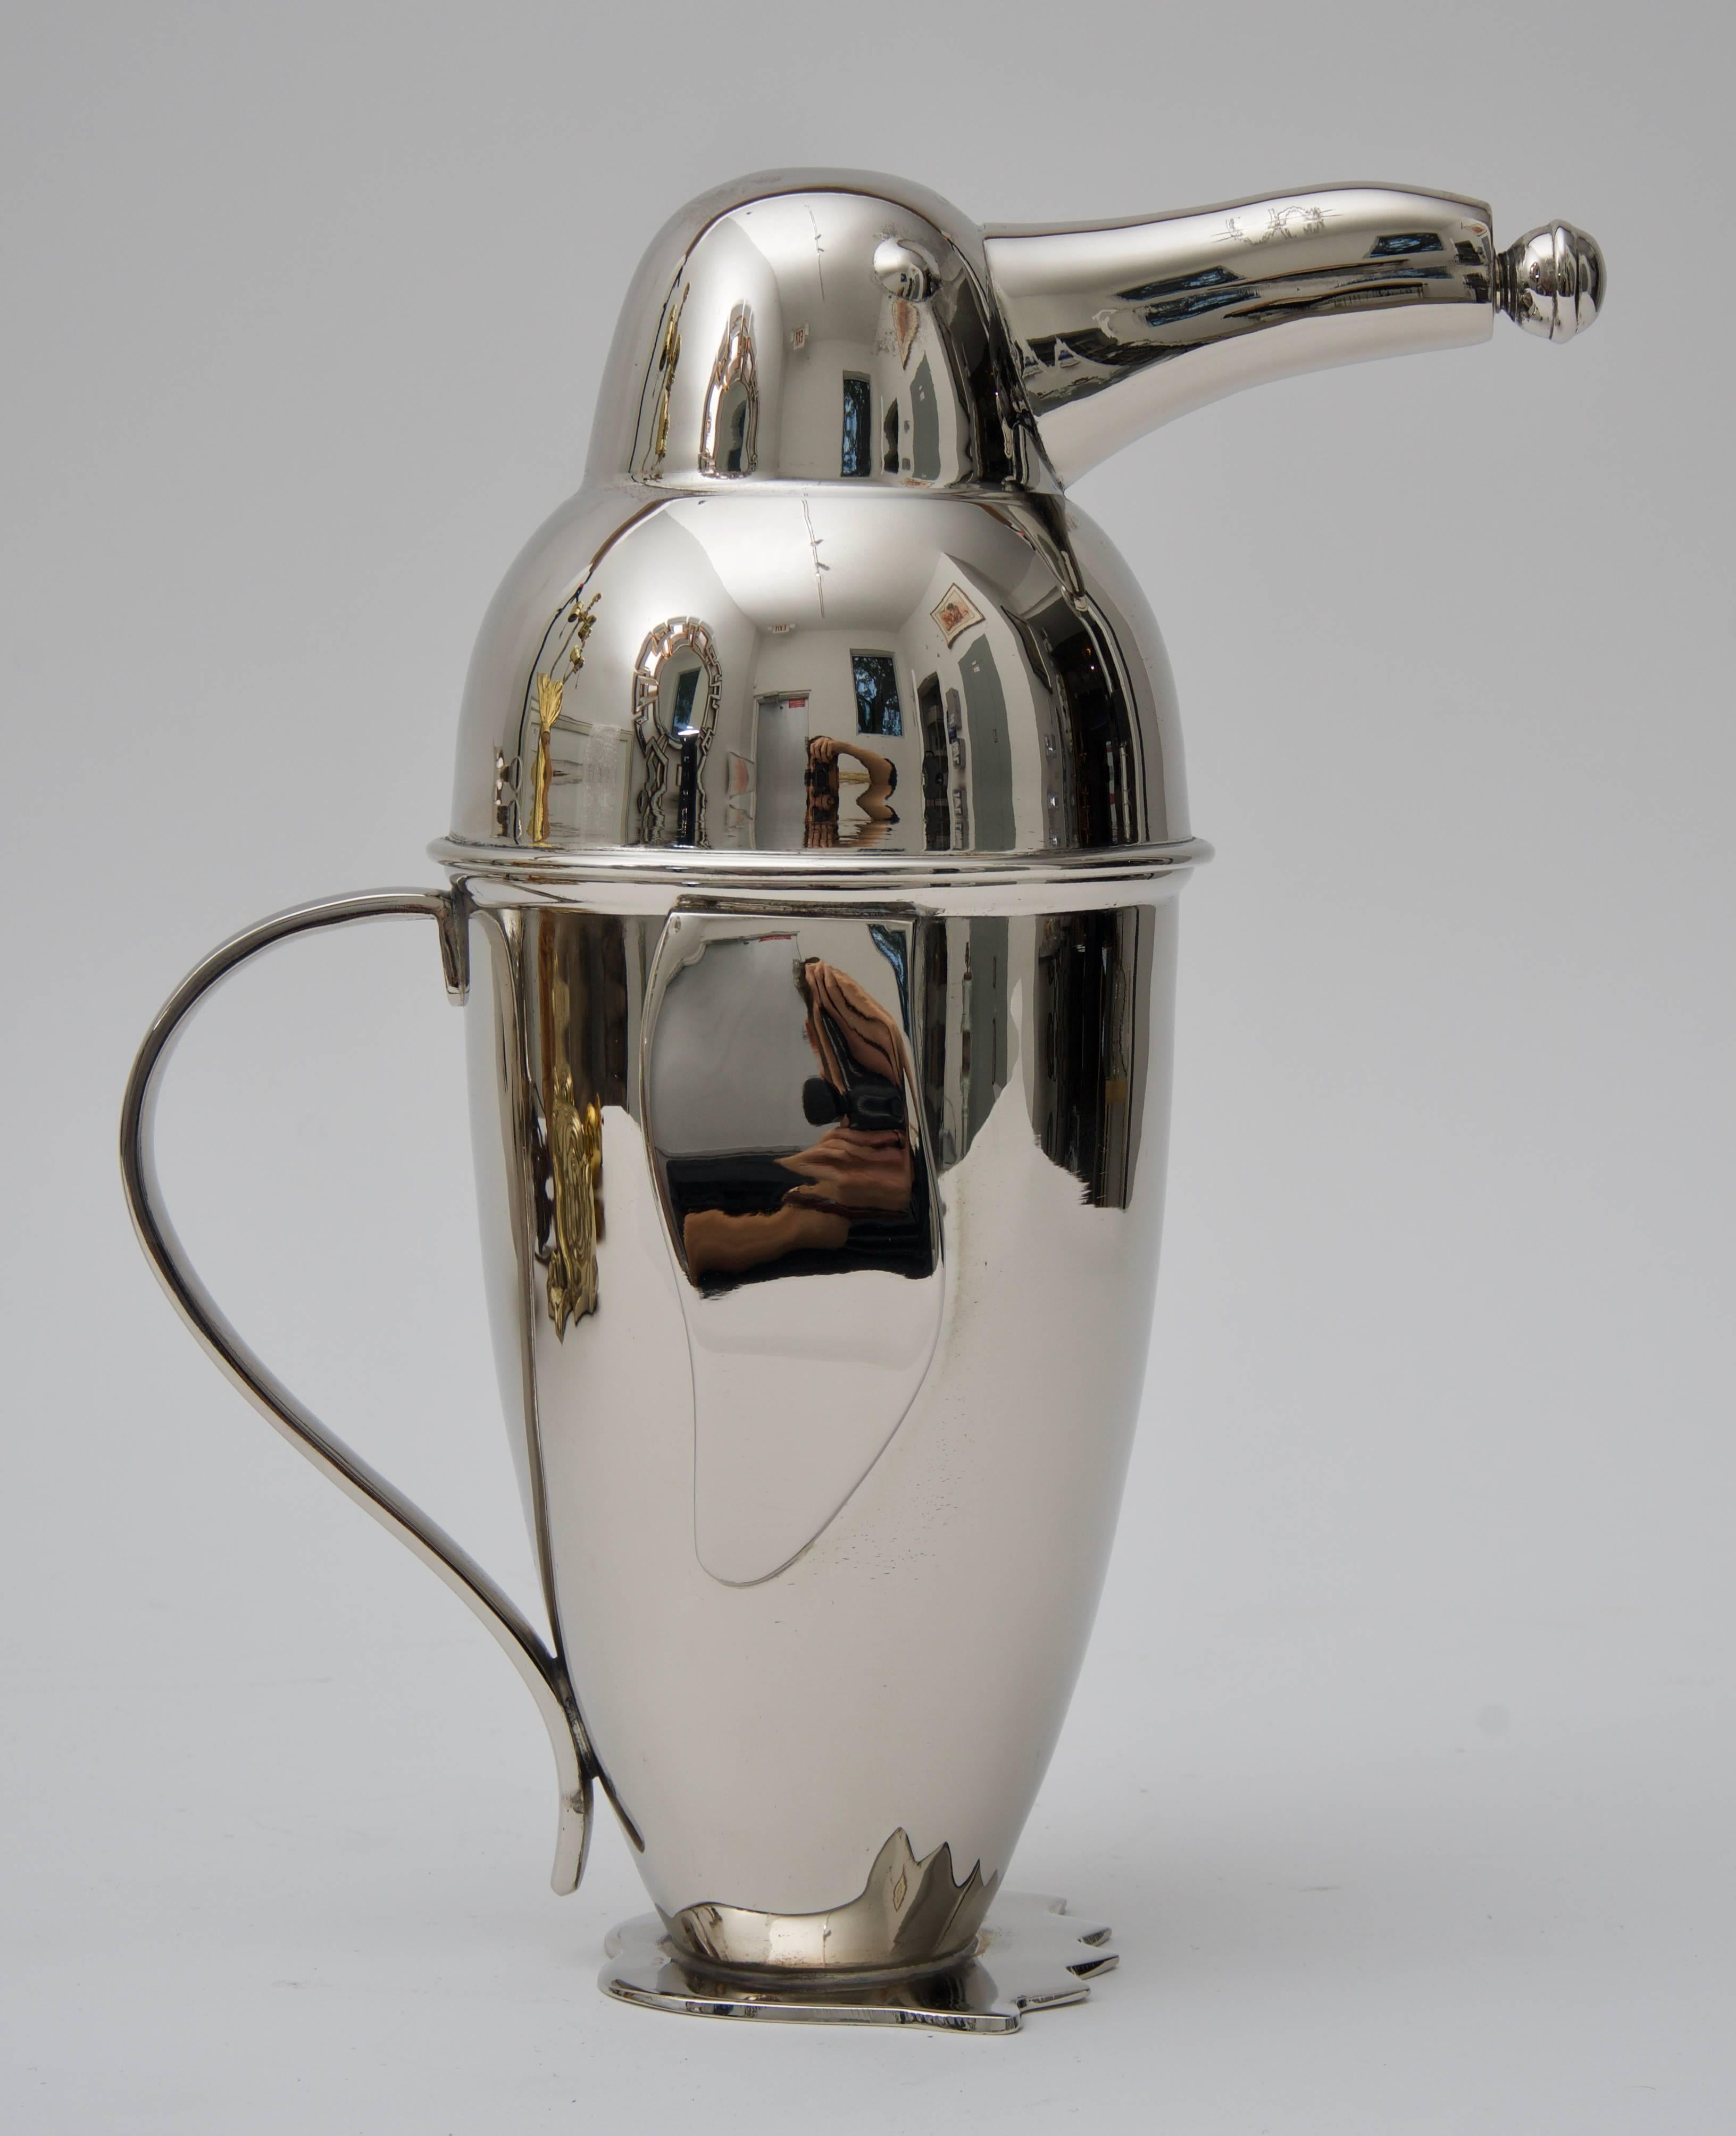 This stylish Art Deco inspired cocktail shaker takes its inspiration from pieces created by the firm of Napier and has recently been professionally nickel-plated.